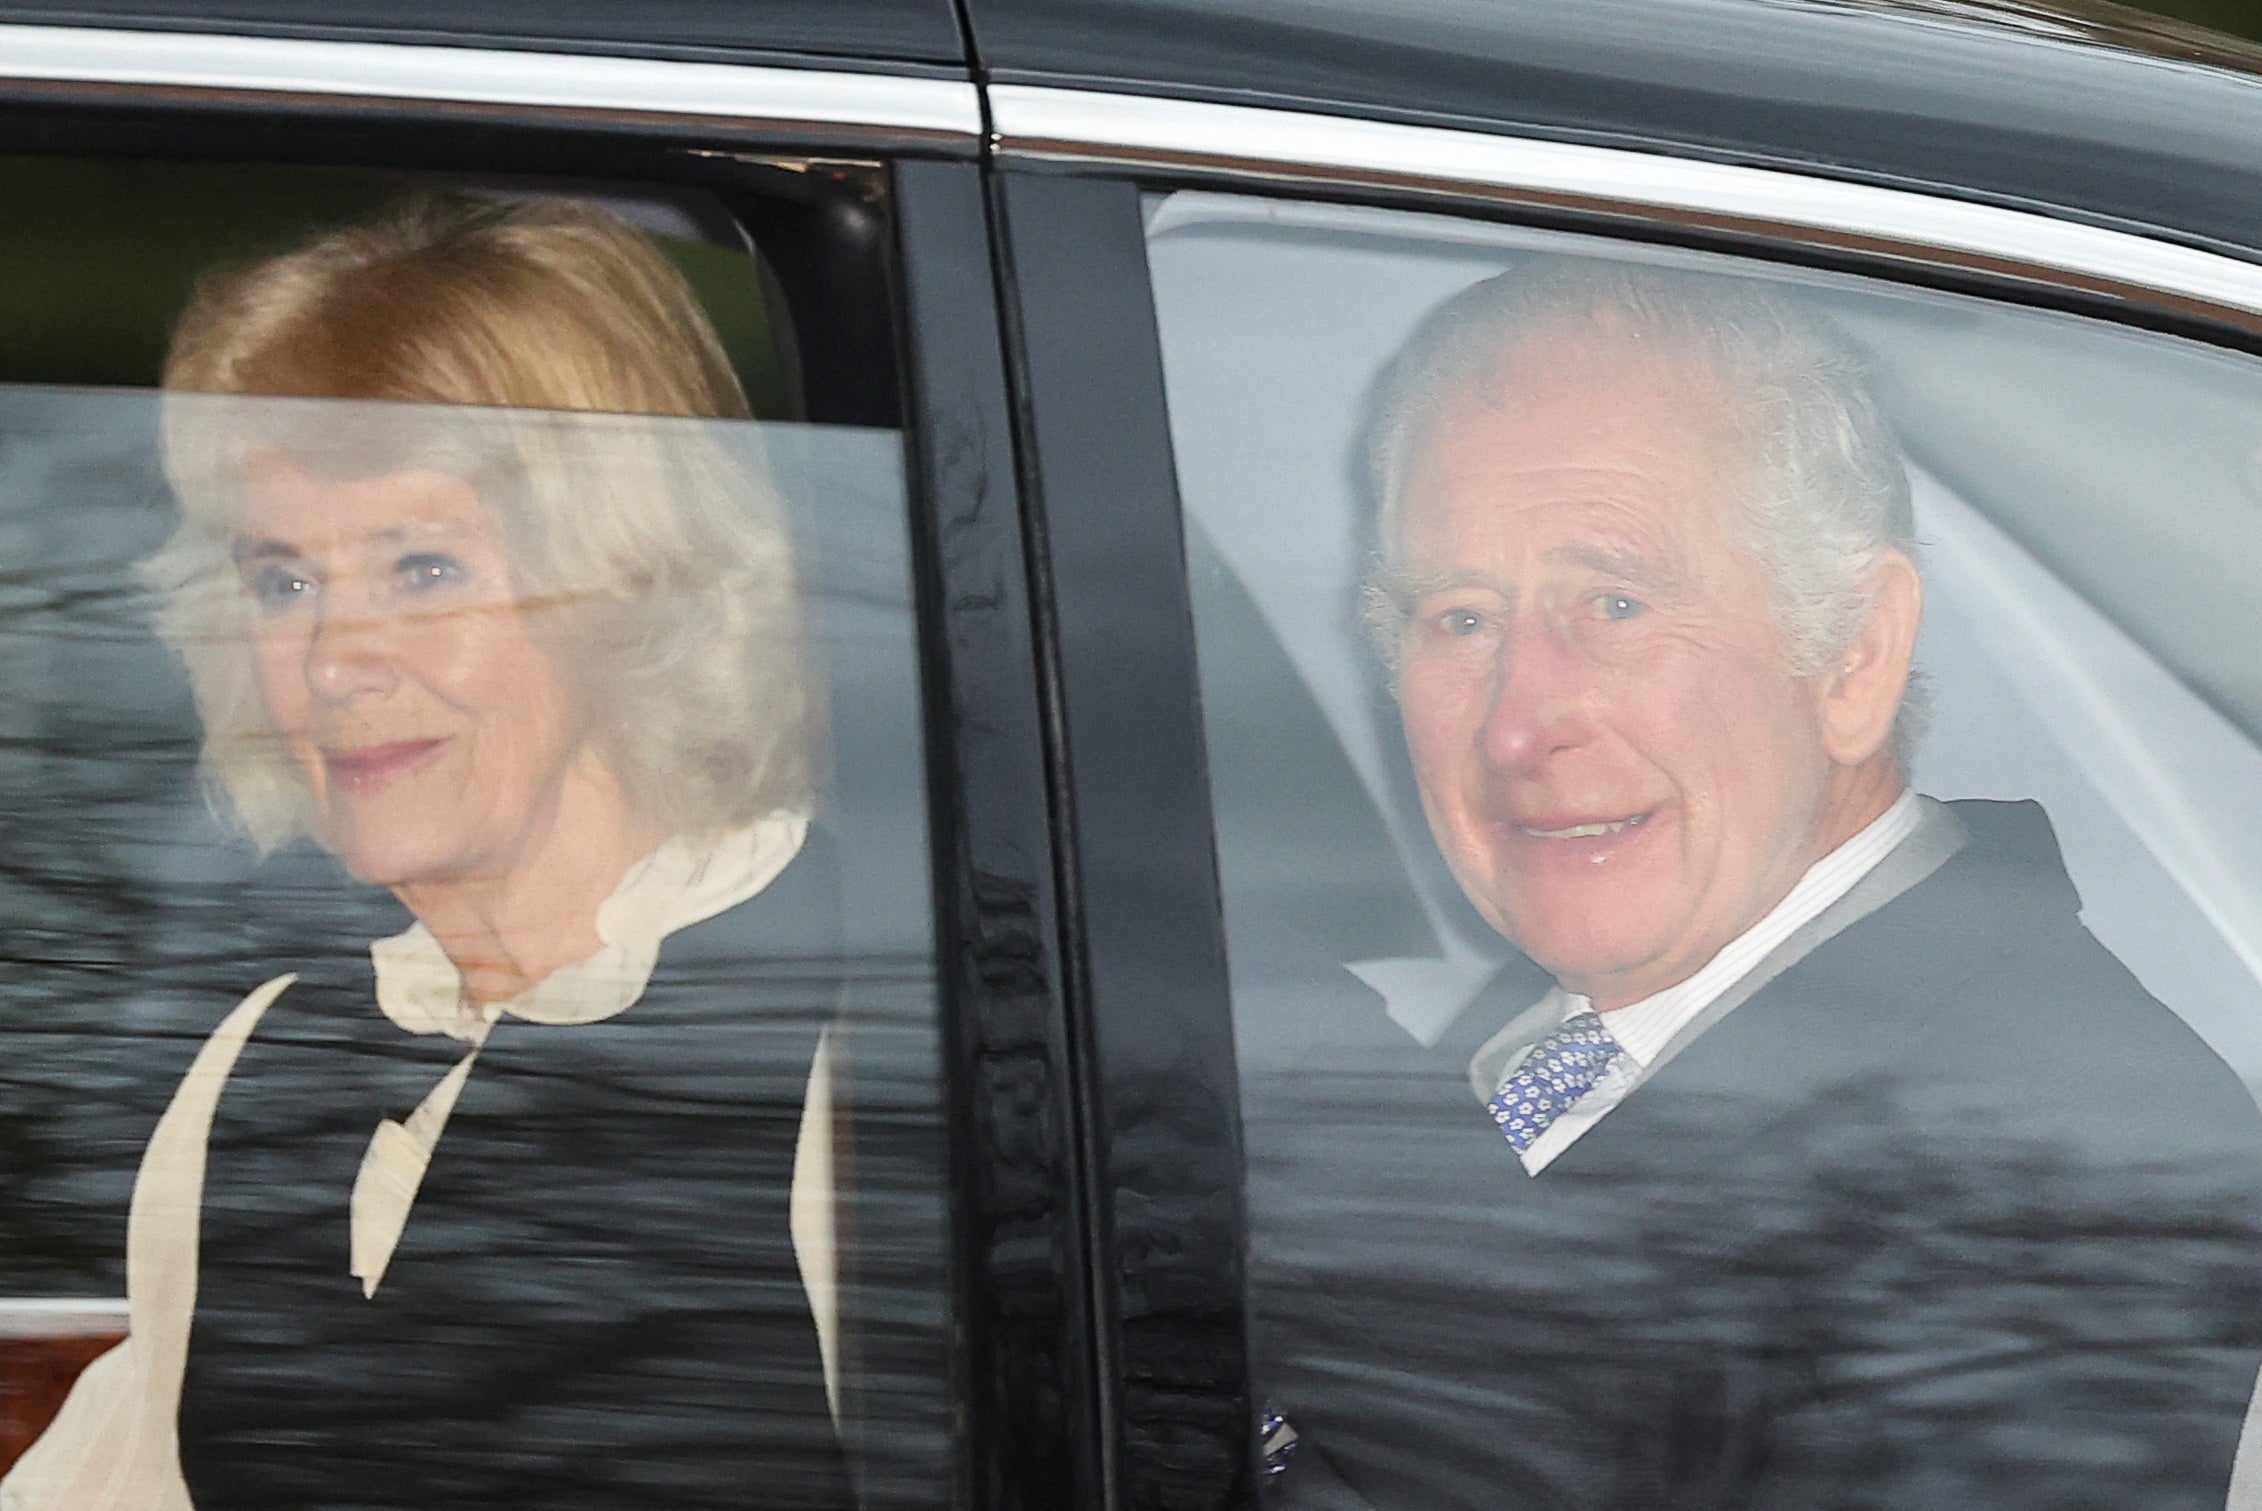 The King and Camilla were seen leaving Buckingham Palace earlier this week